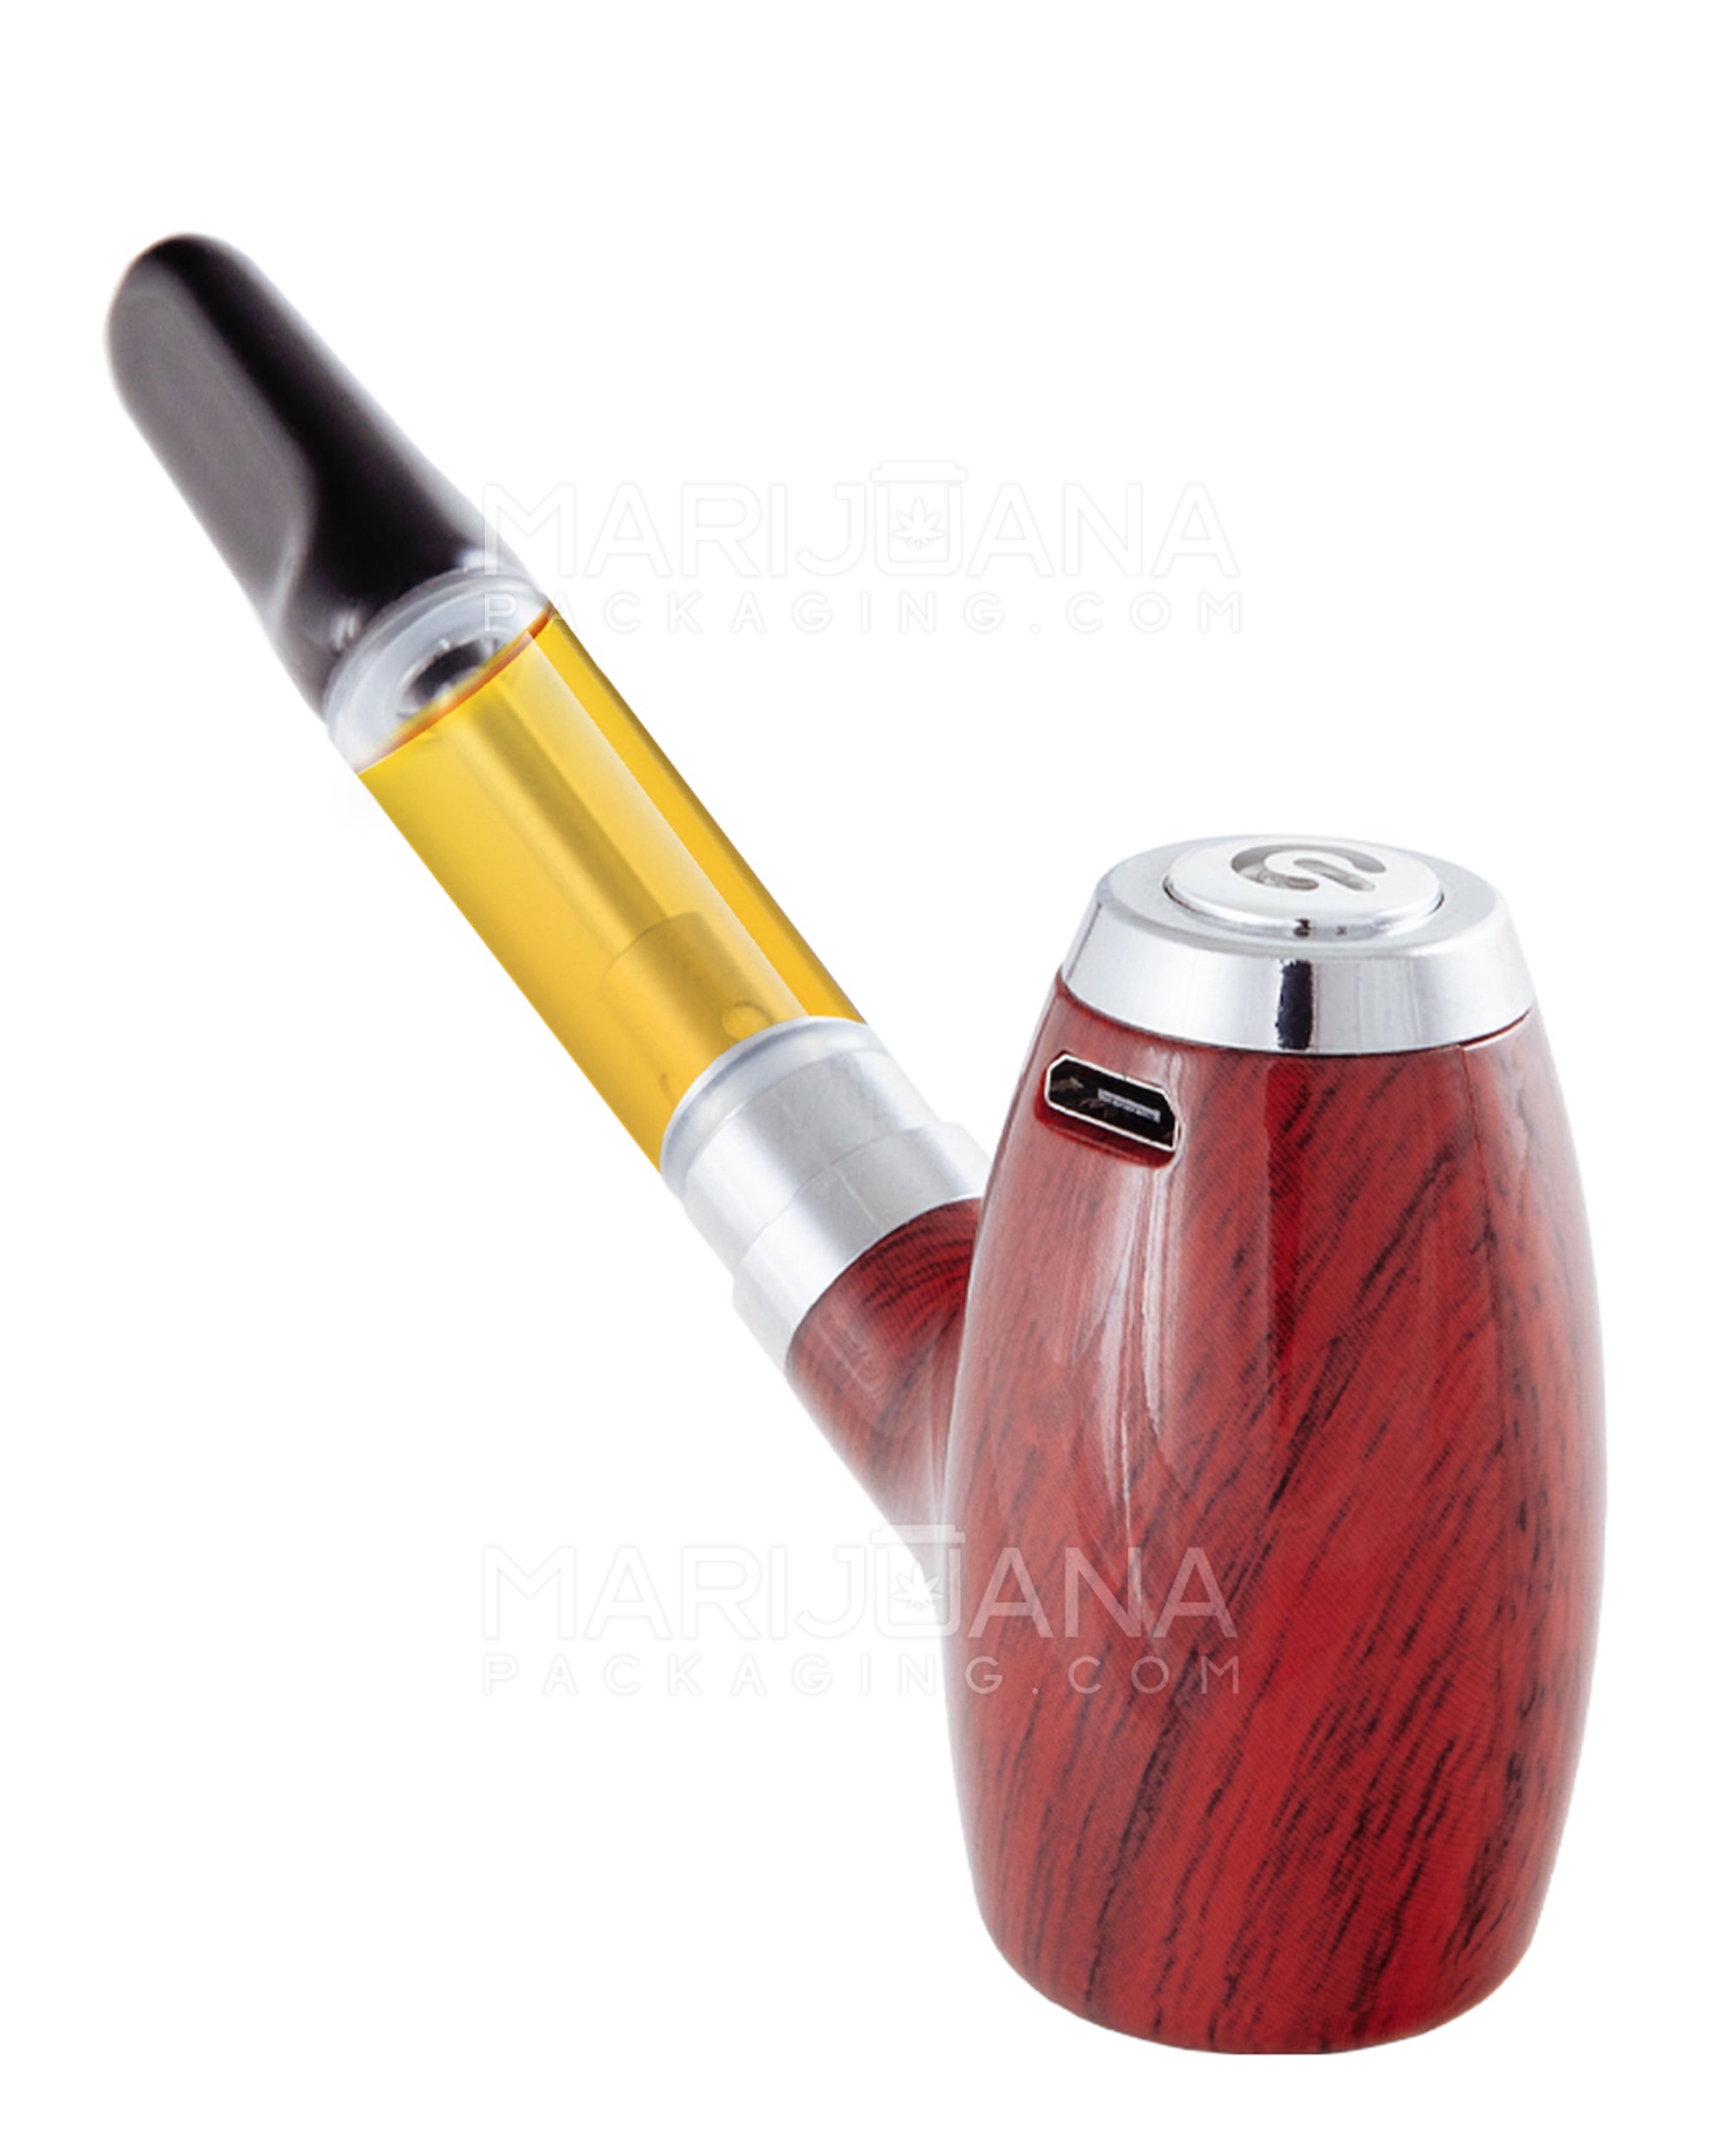 Variable Voltage "Old Man's Pipe" Shaped Vape Cartridge Battery | 900mah - Redwood Wood - 510 Thread - 4